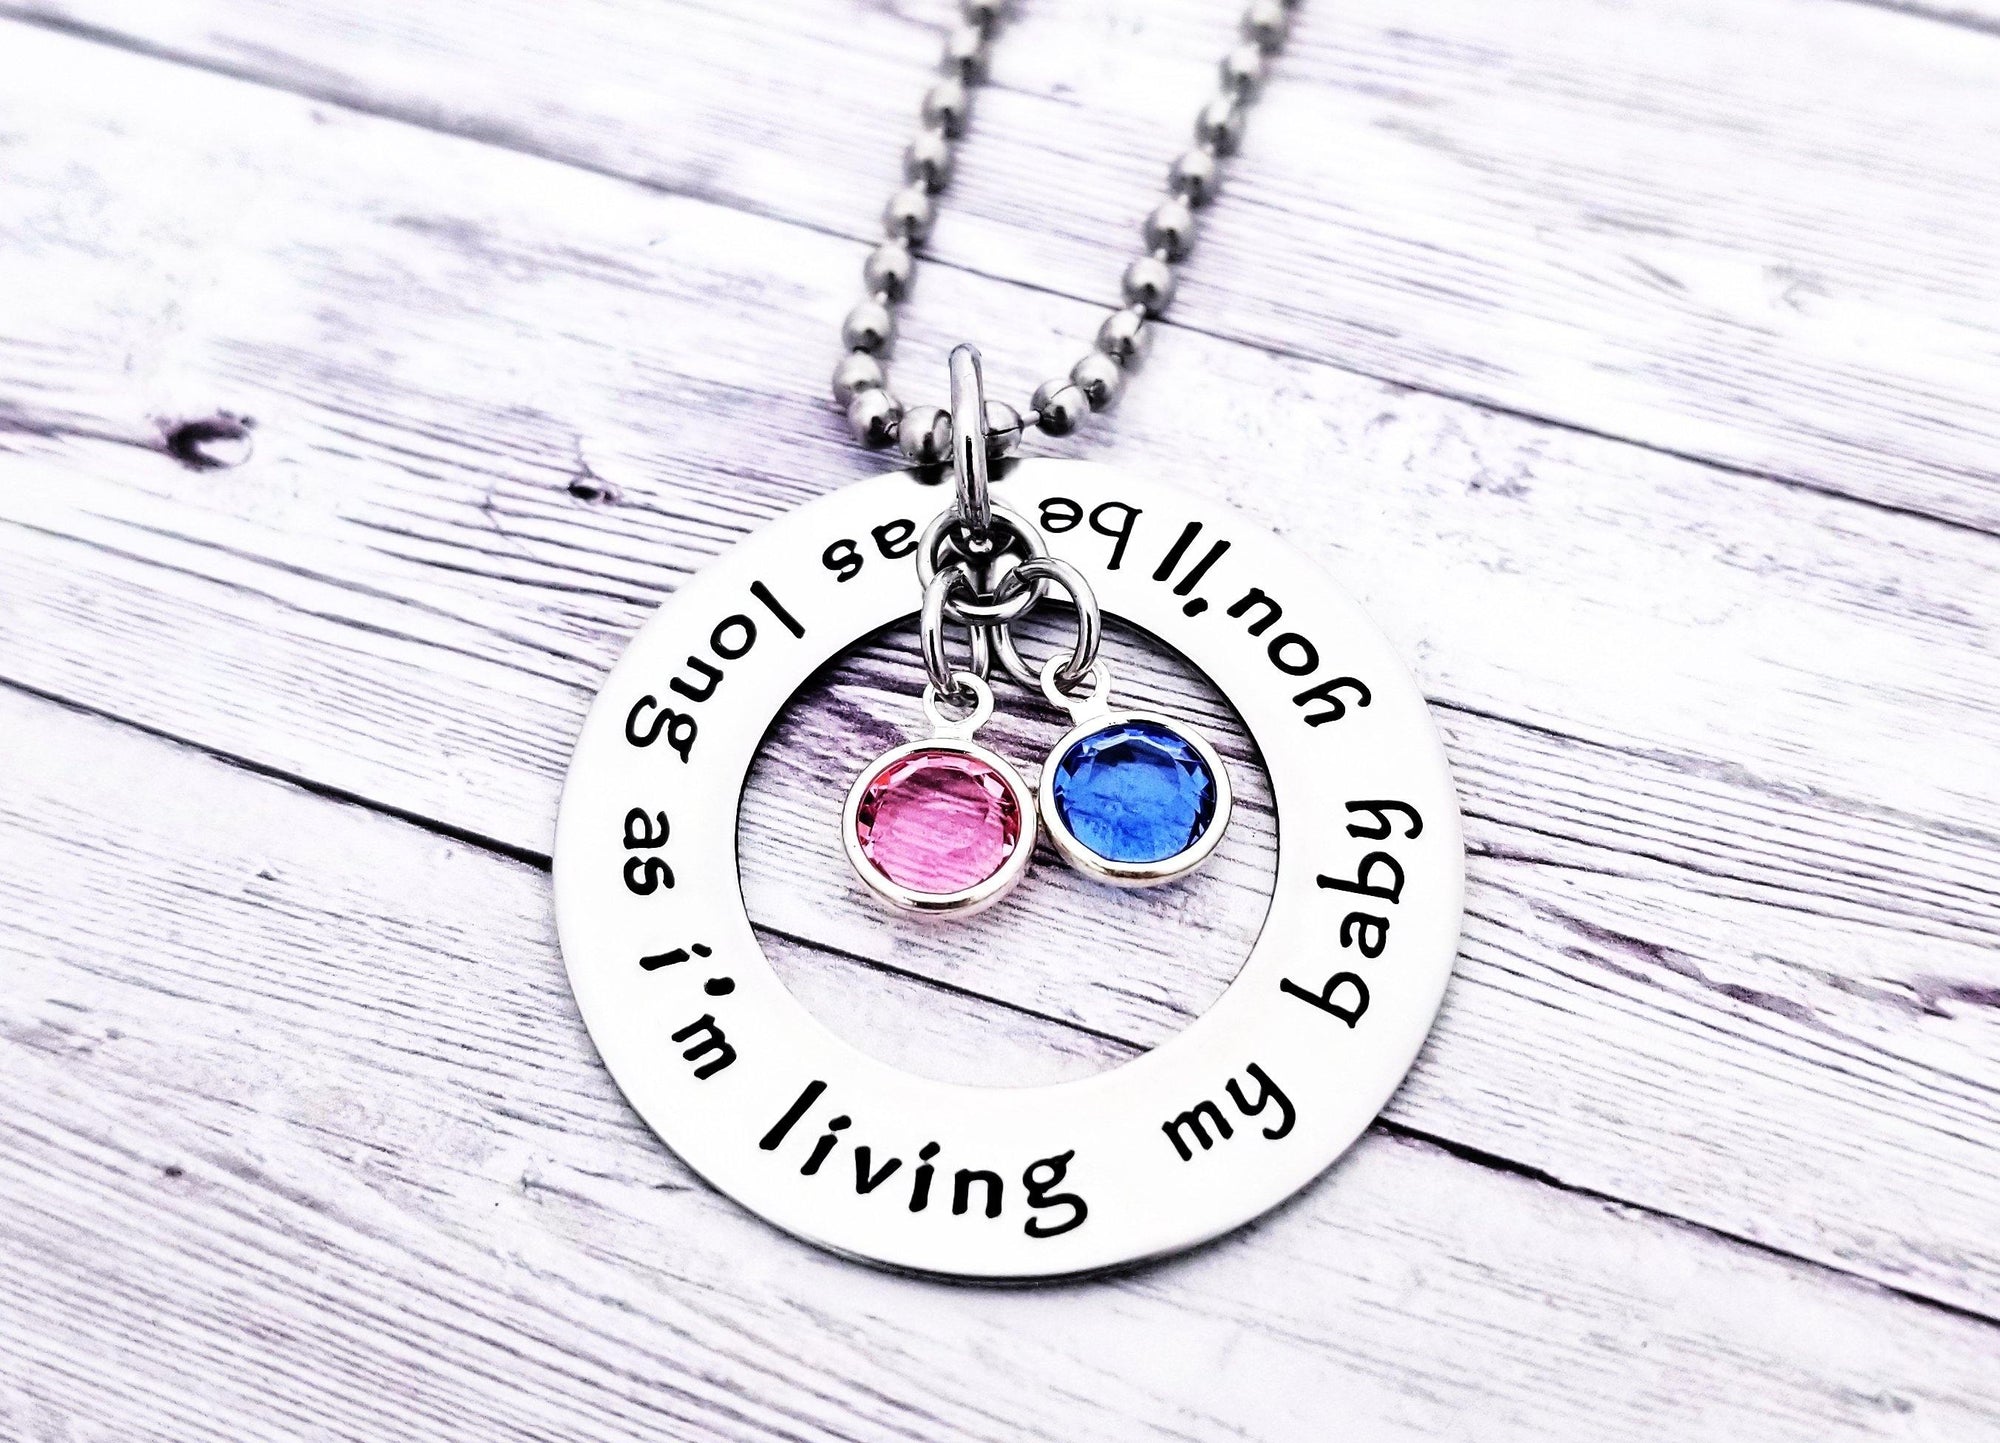 As Long As I'm Living, My Baby You'll Be, Mother's Necklace, Count Your Blessings, Birthstone Necklace